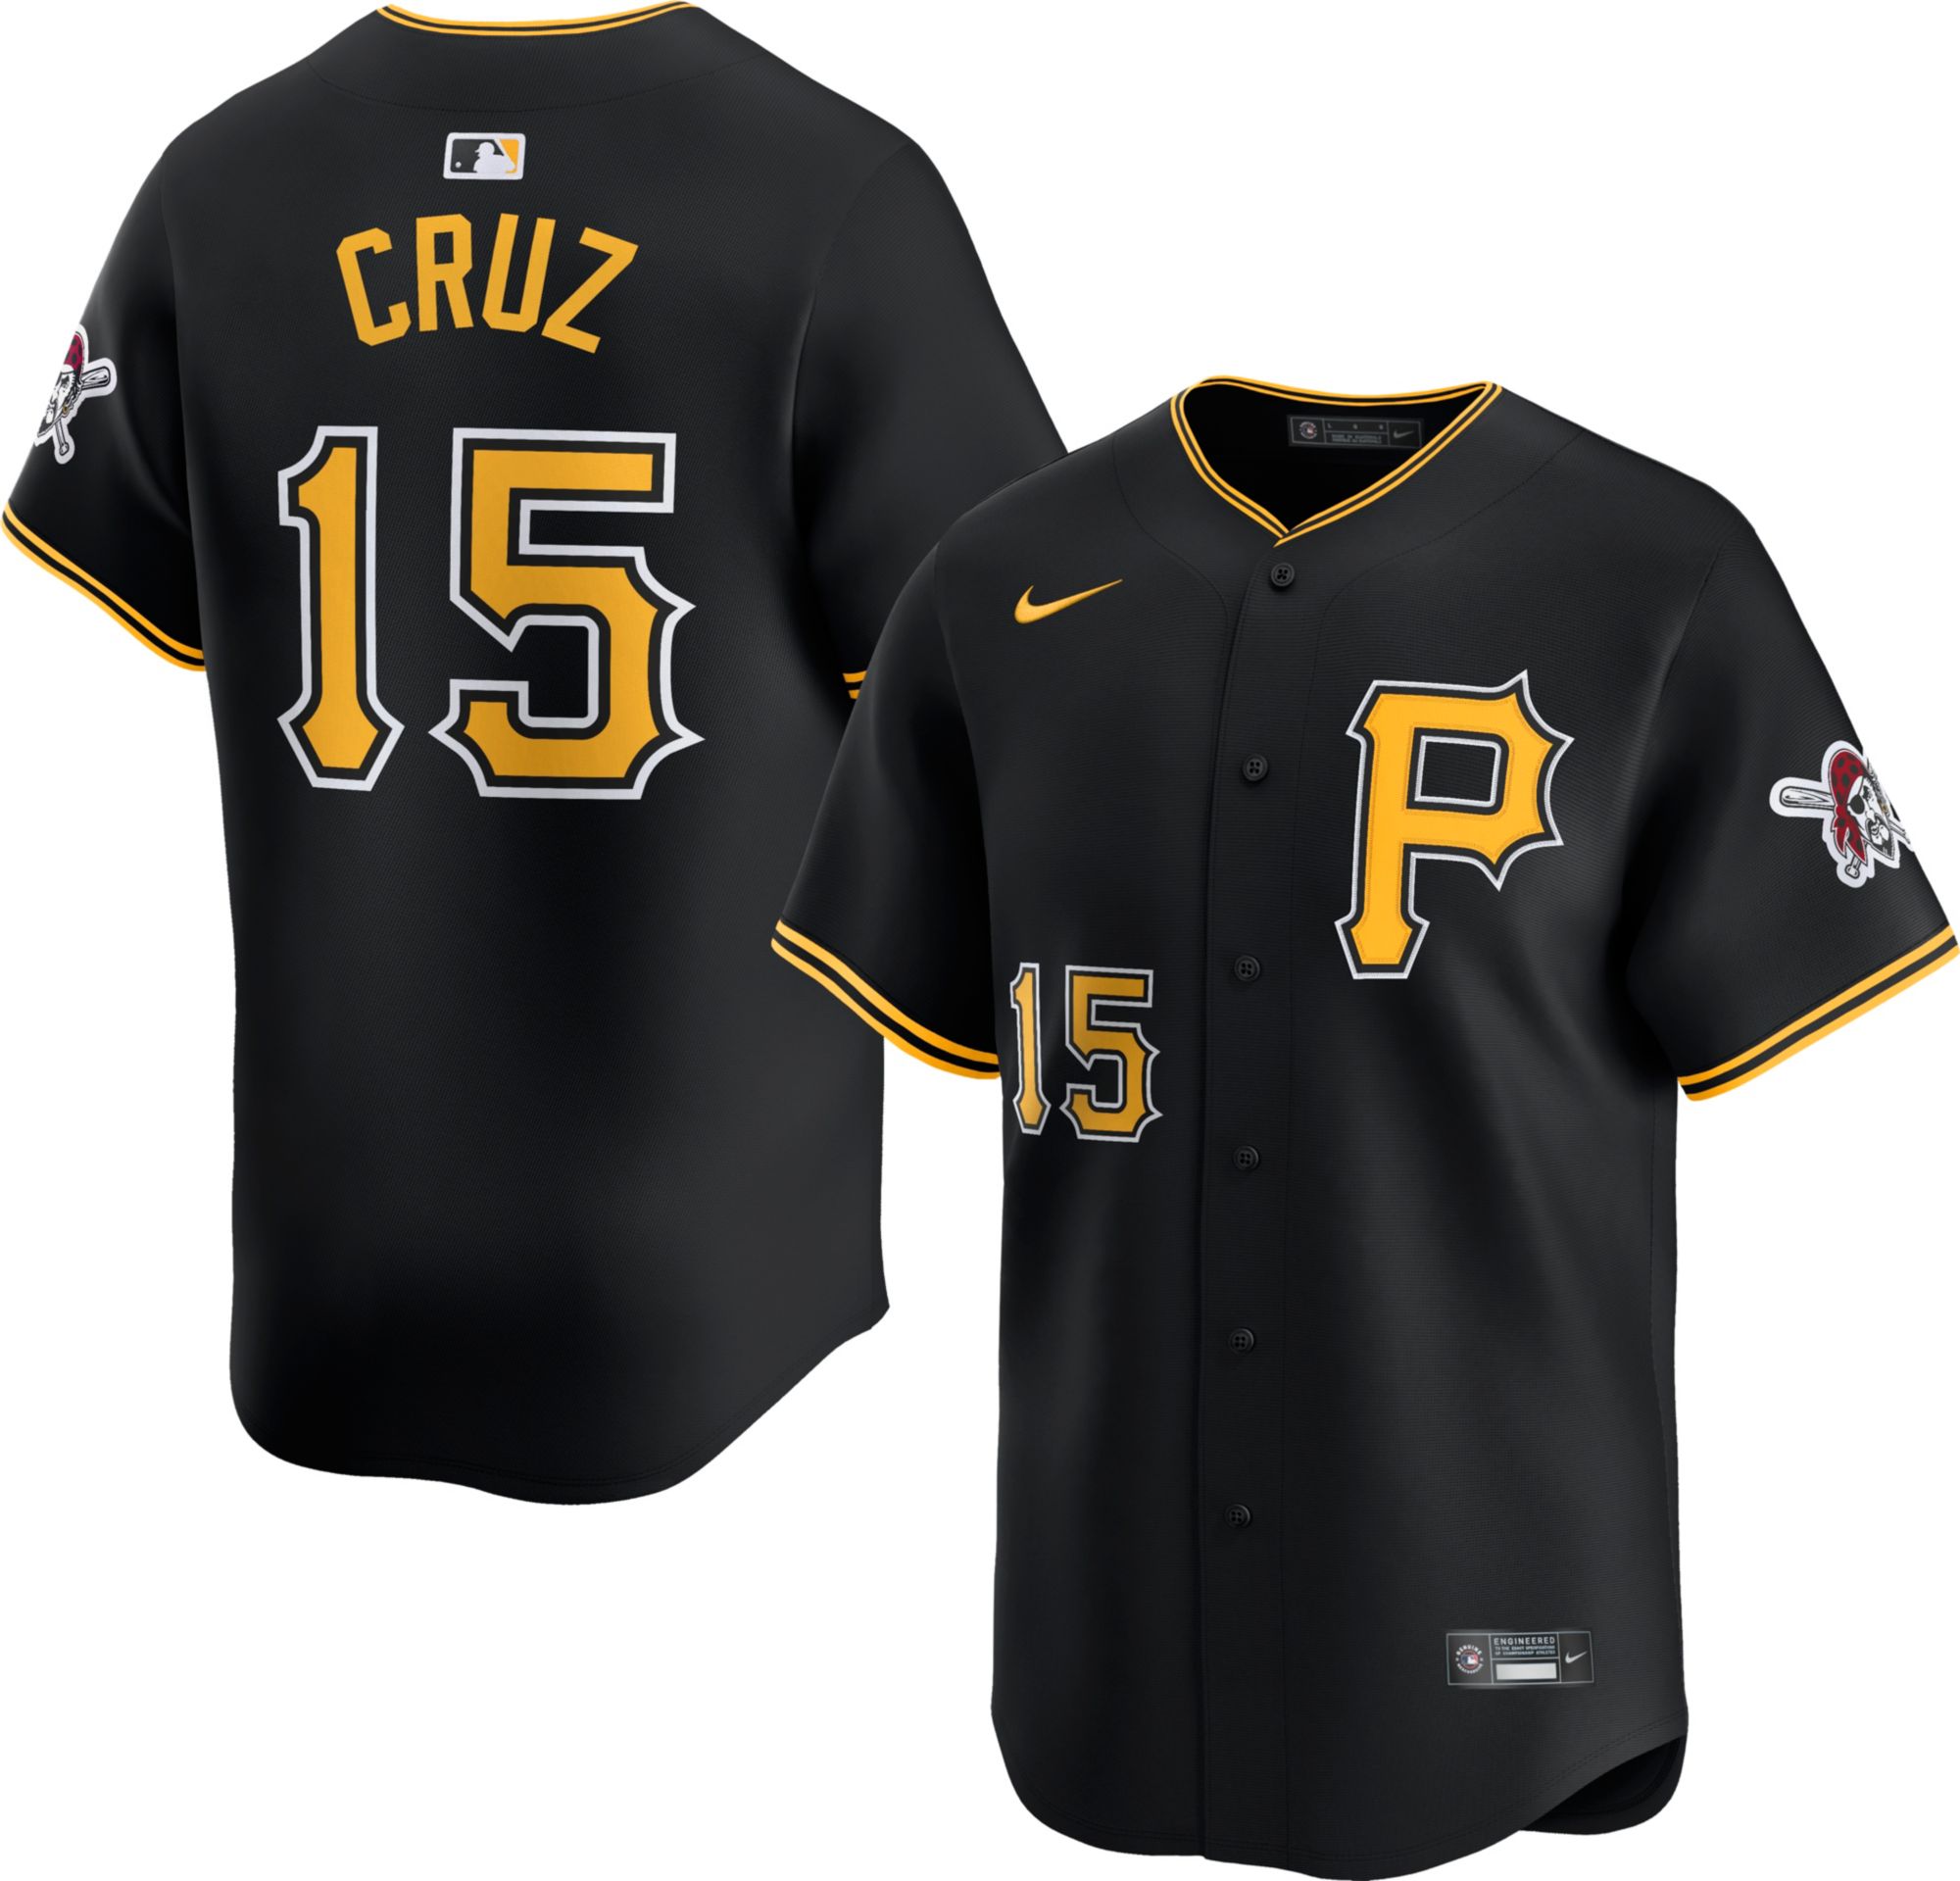 Pirates home jersey